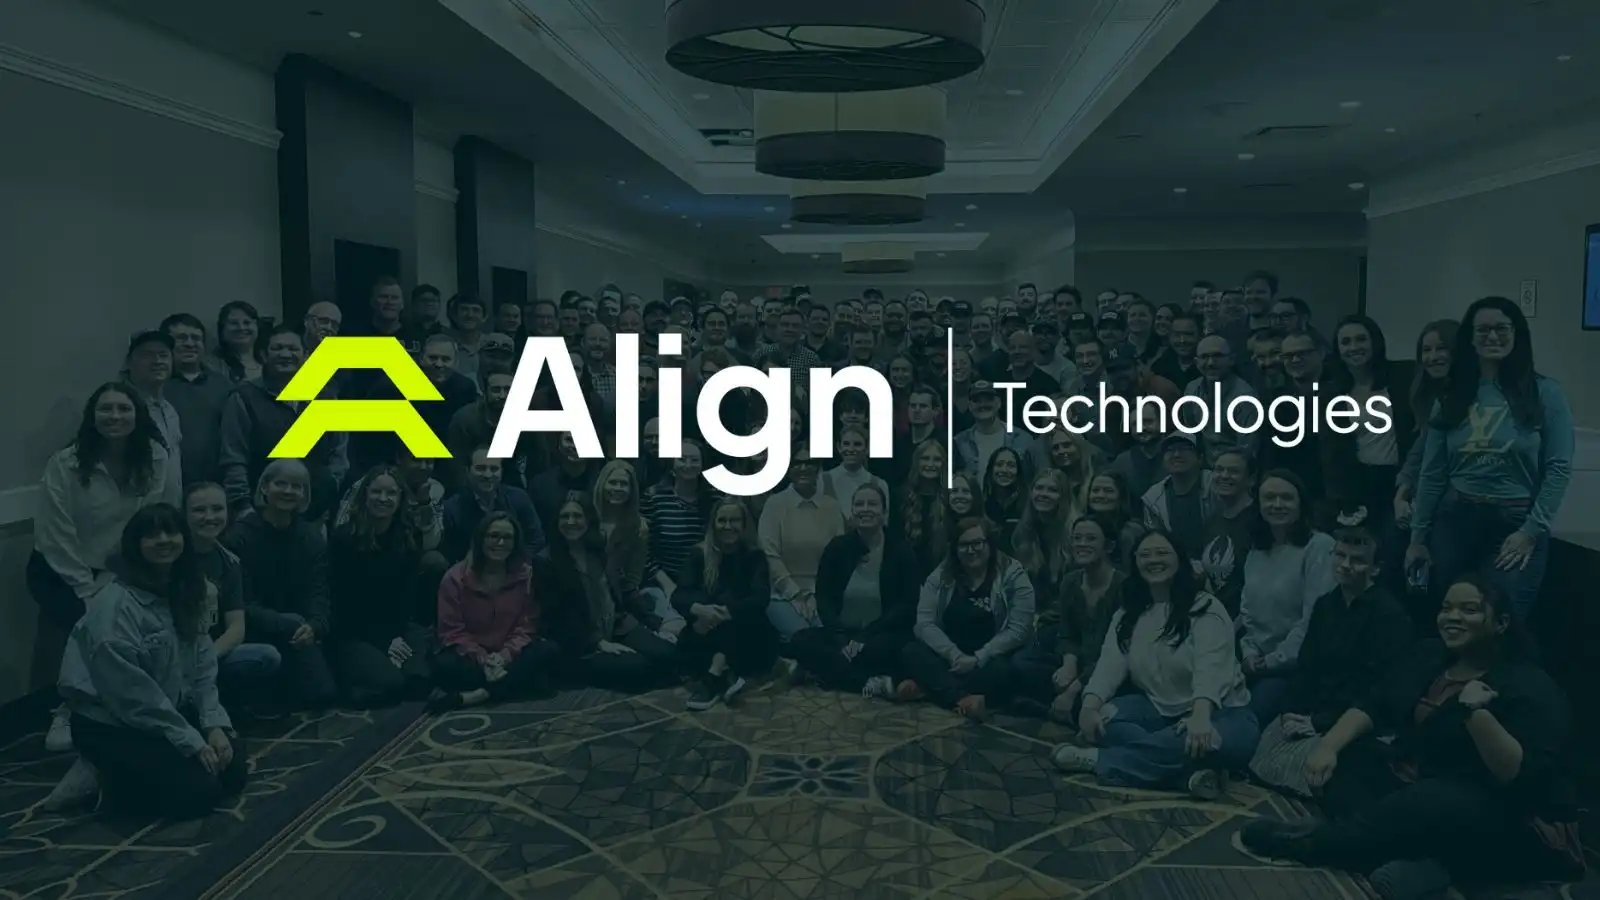 align-website-featured-image-origin-page-1600x900_APPROVED (1)